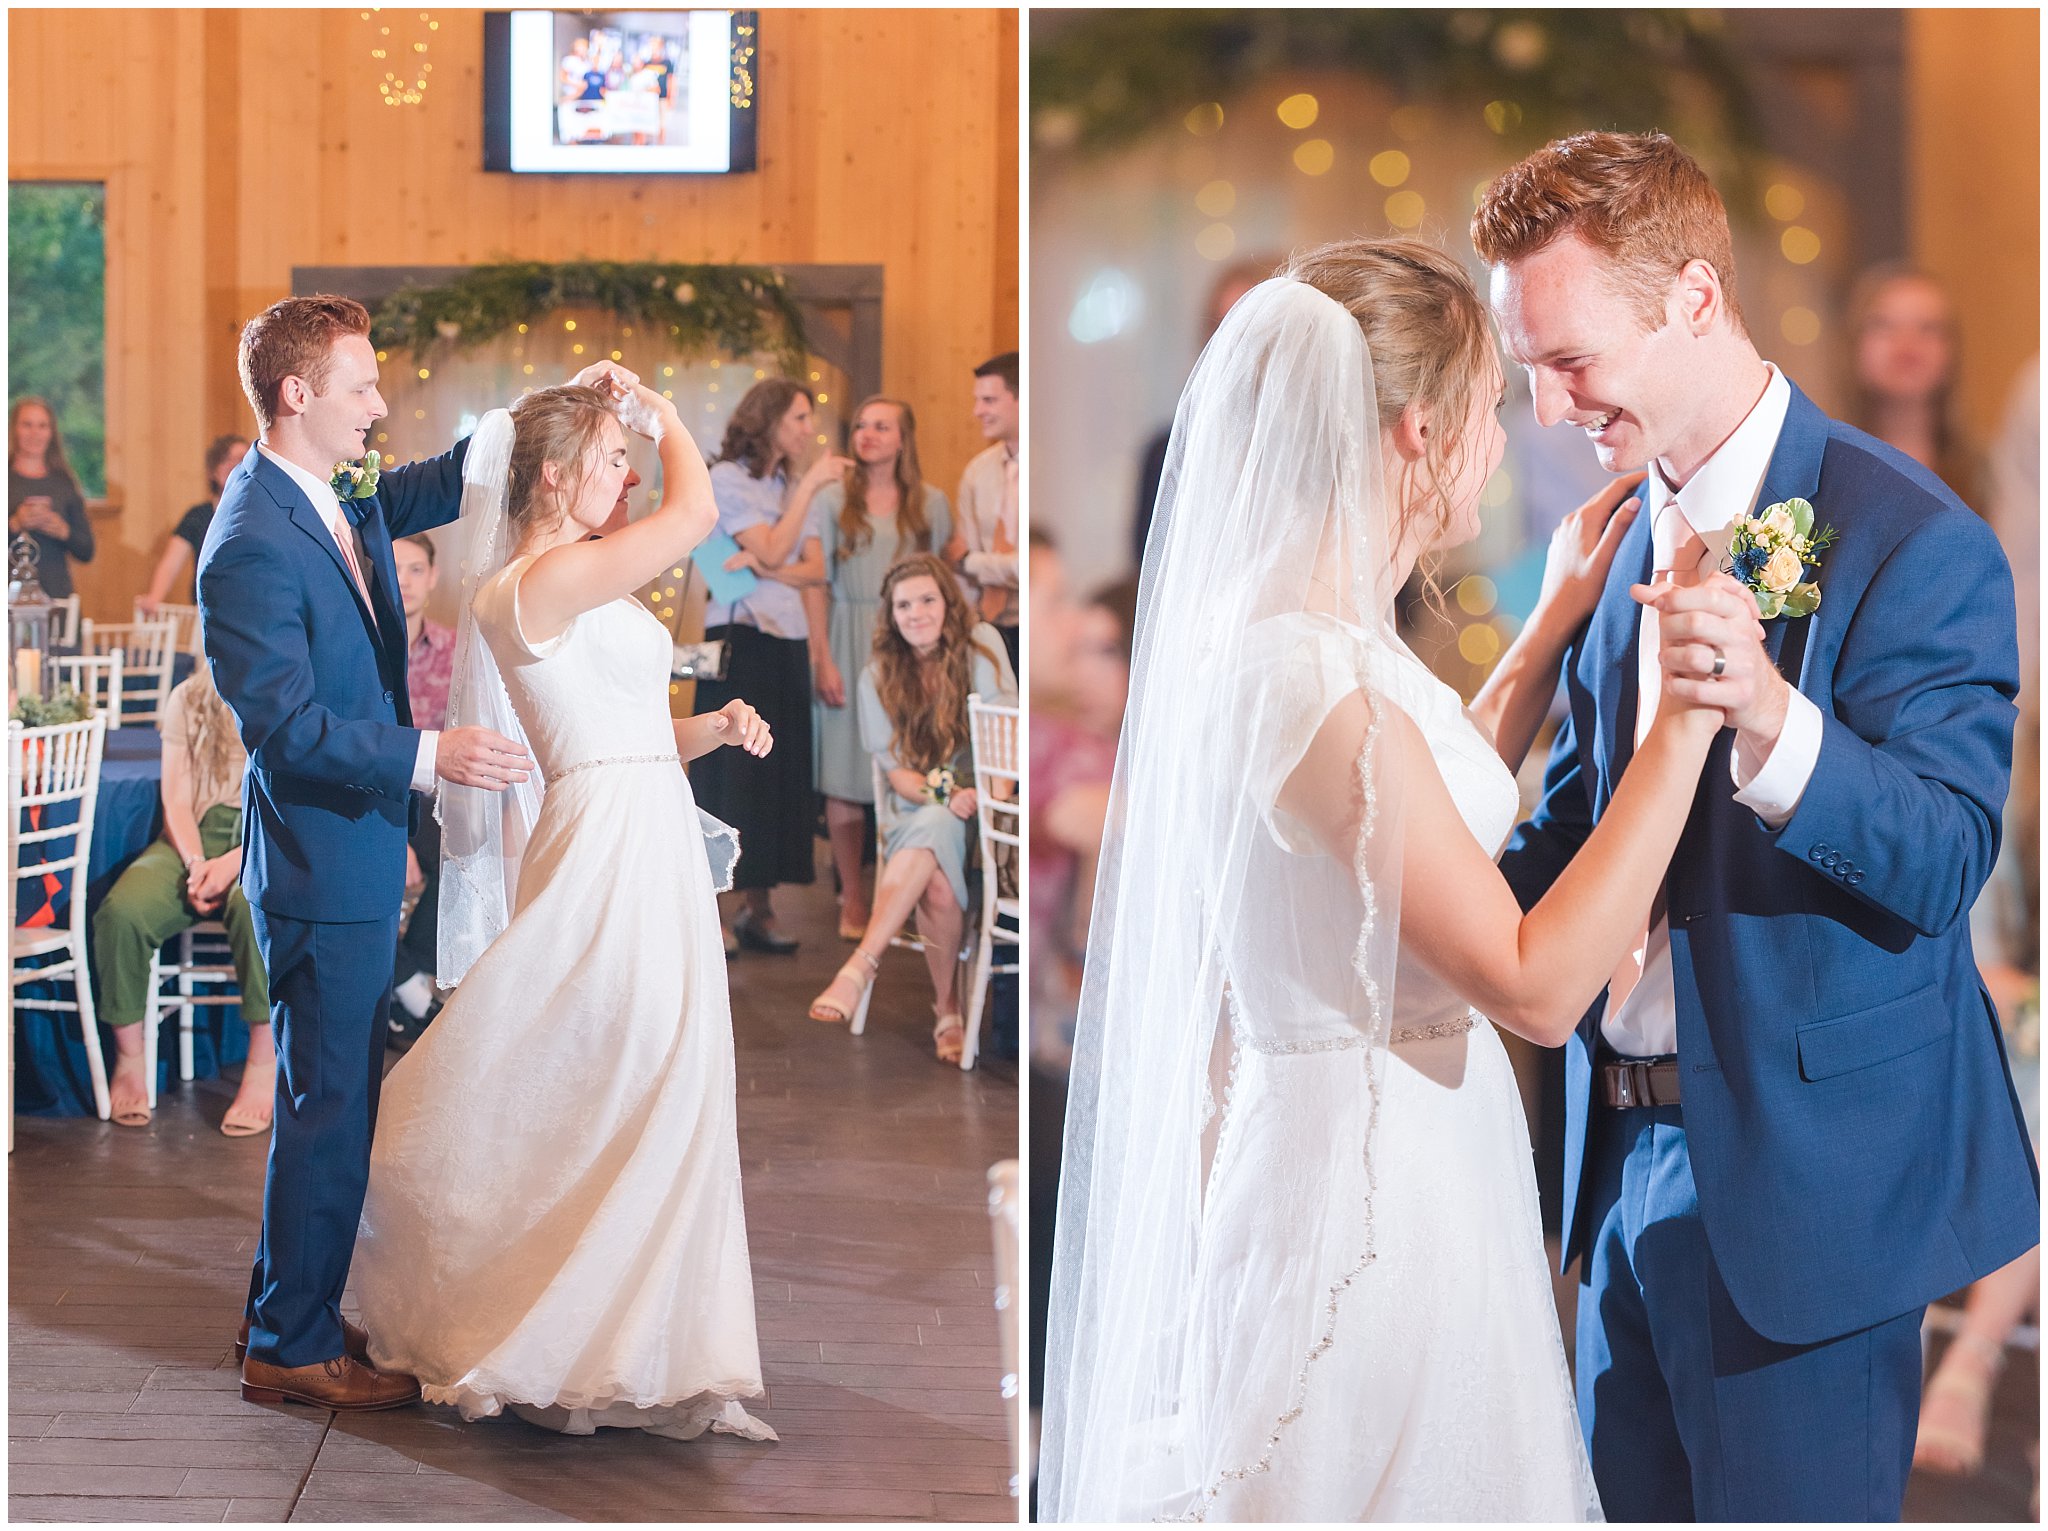 Bride and groom candid first dance moments | Oak Hills Reception and Events Center | Jessie and Dallin Photography